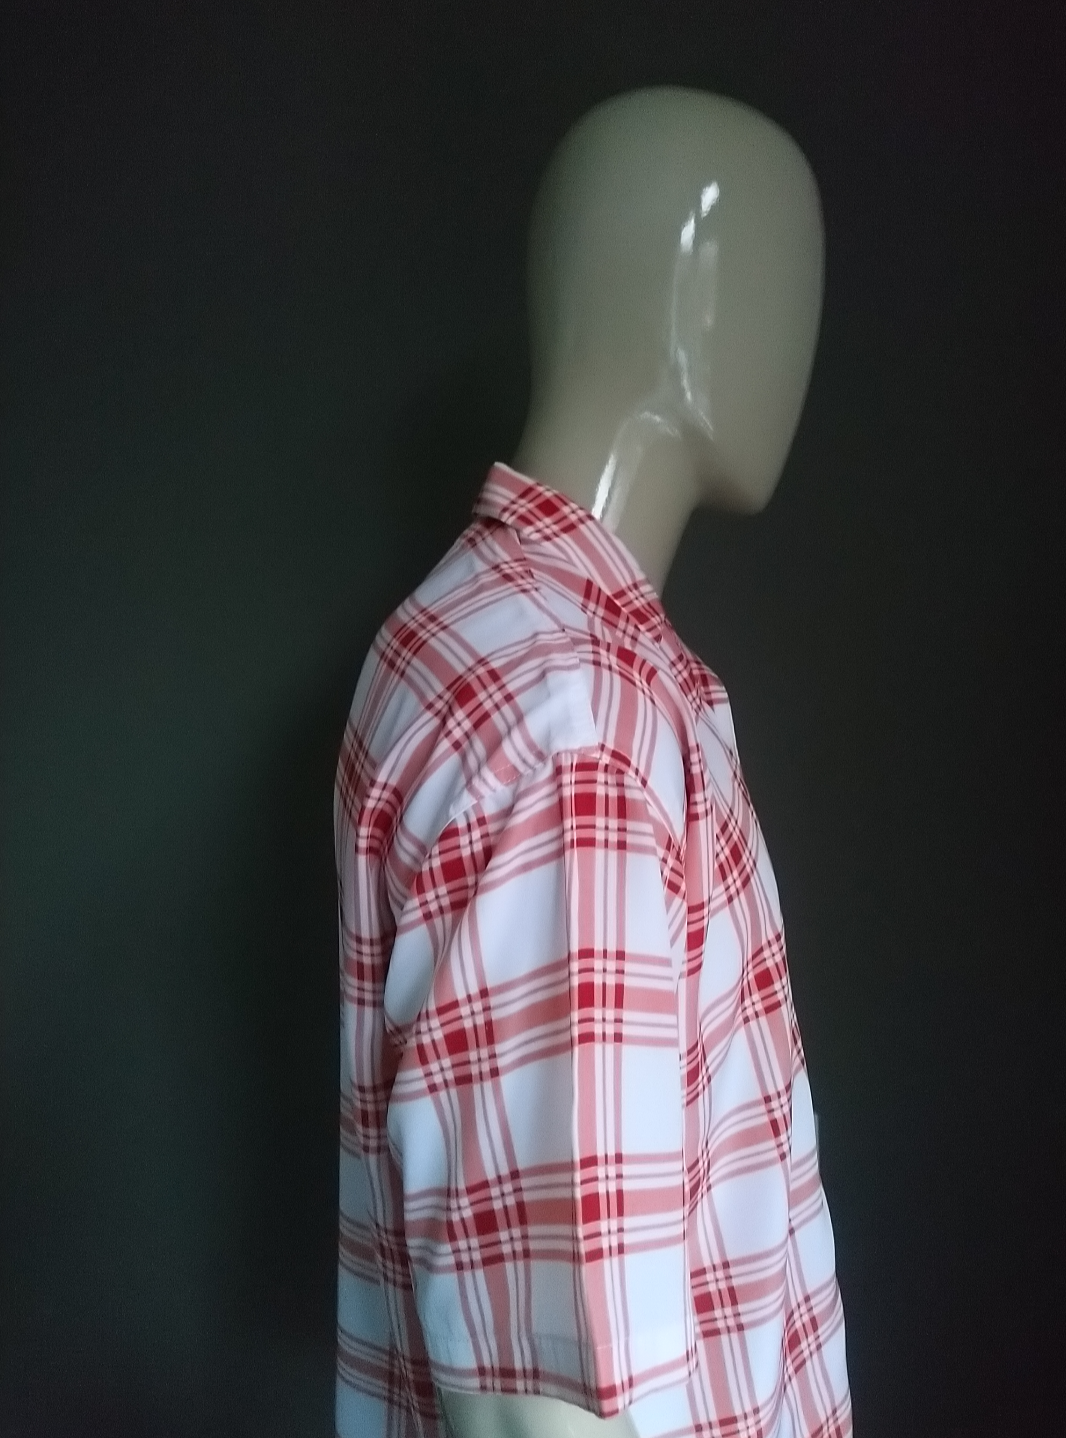 Supercool shirt with short sleeves. Red pink white checkered motif. Size L.